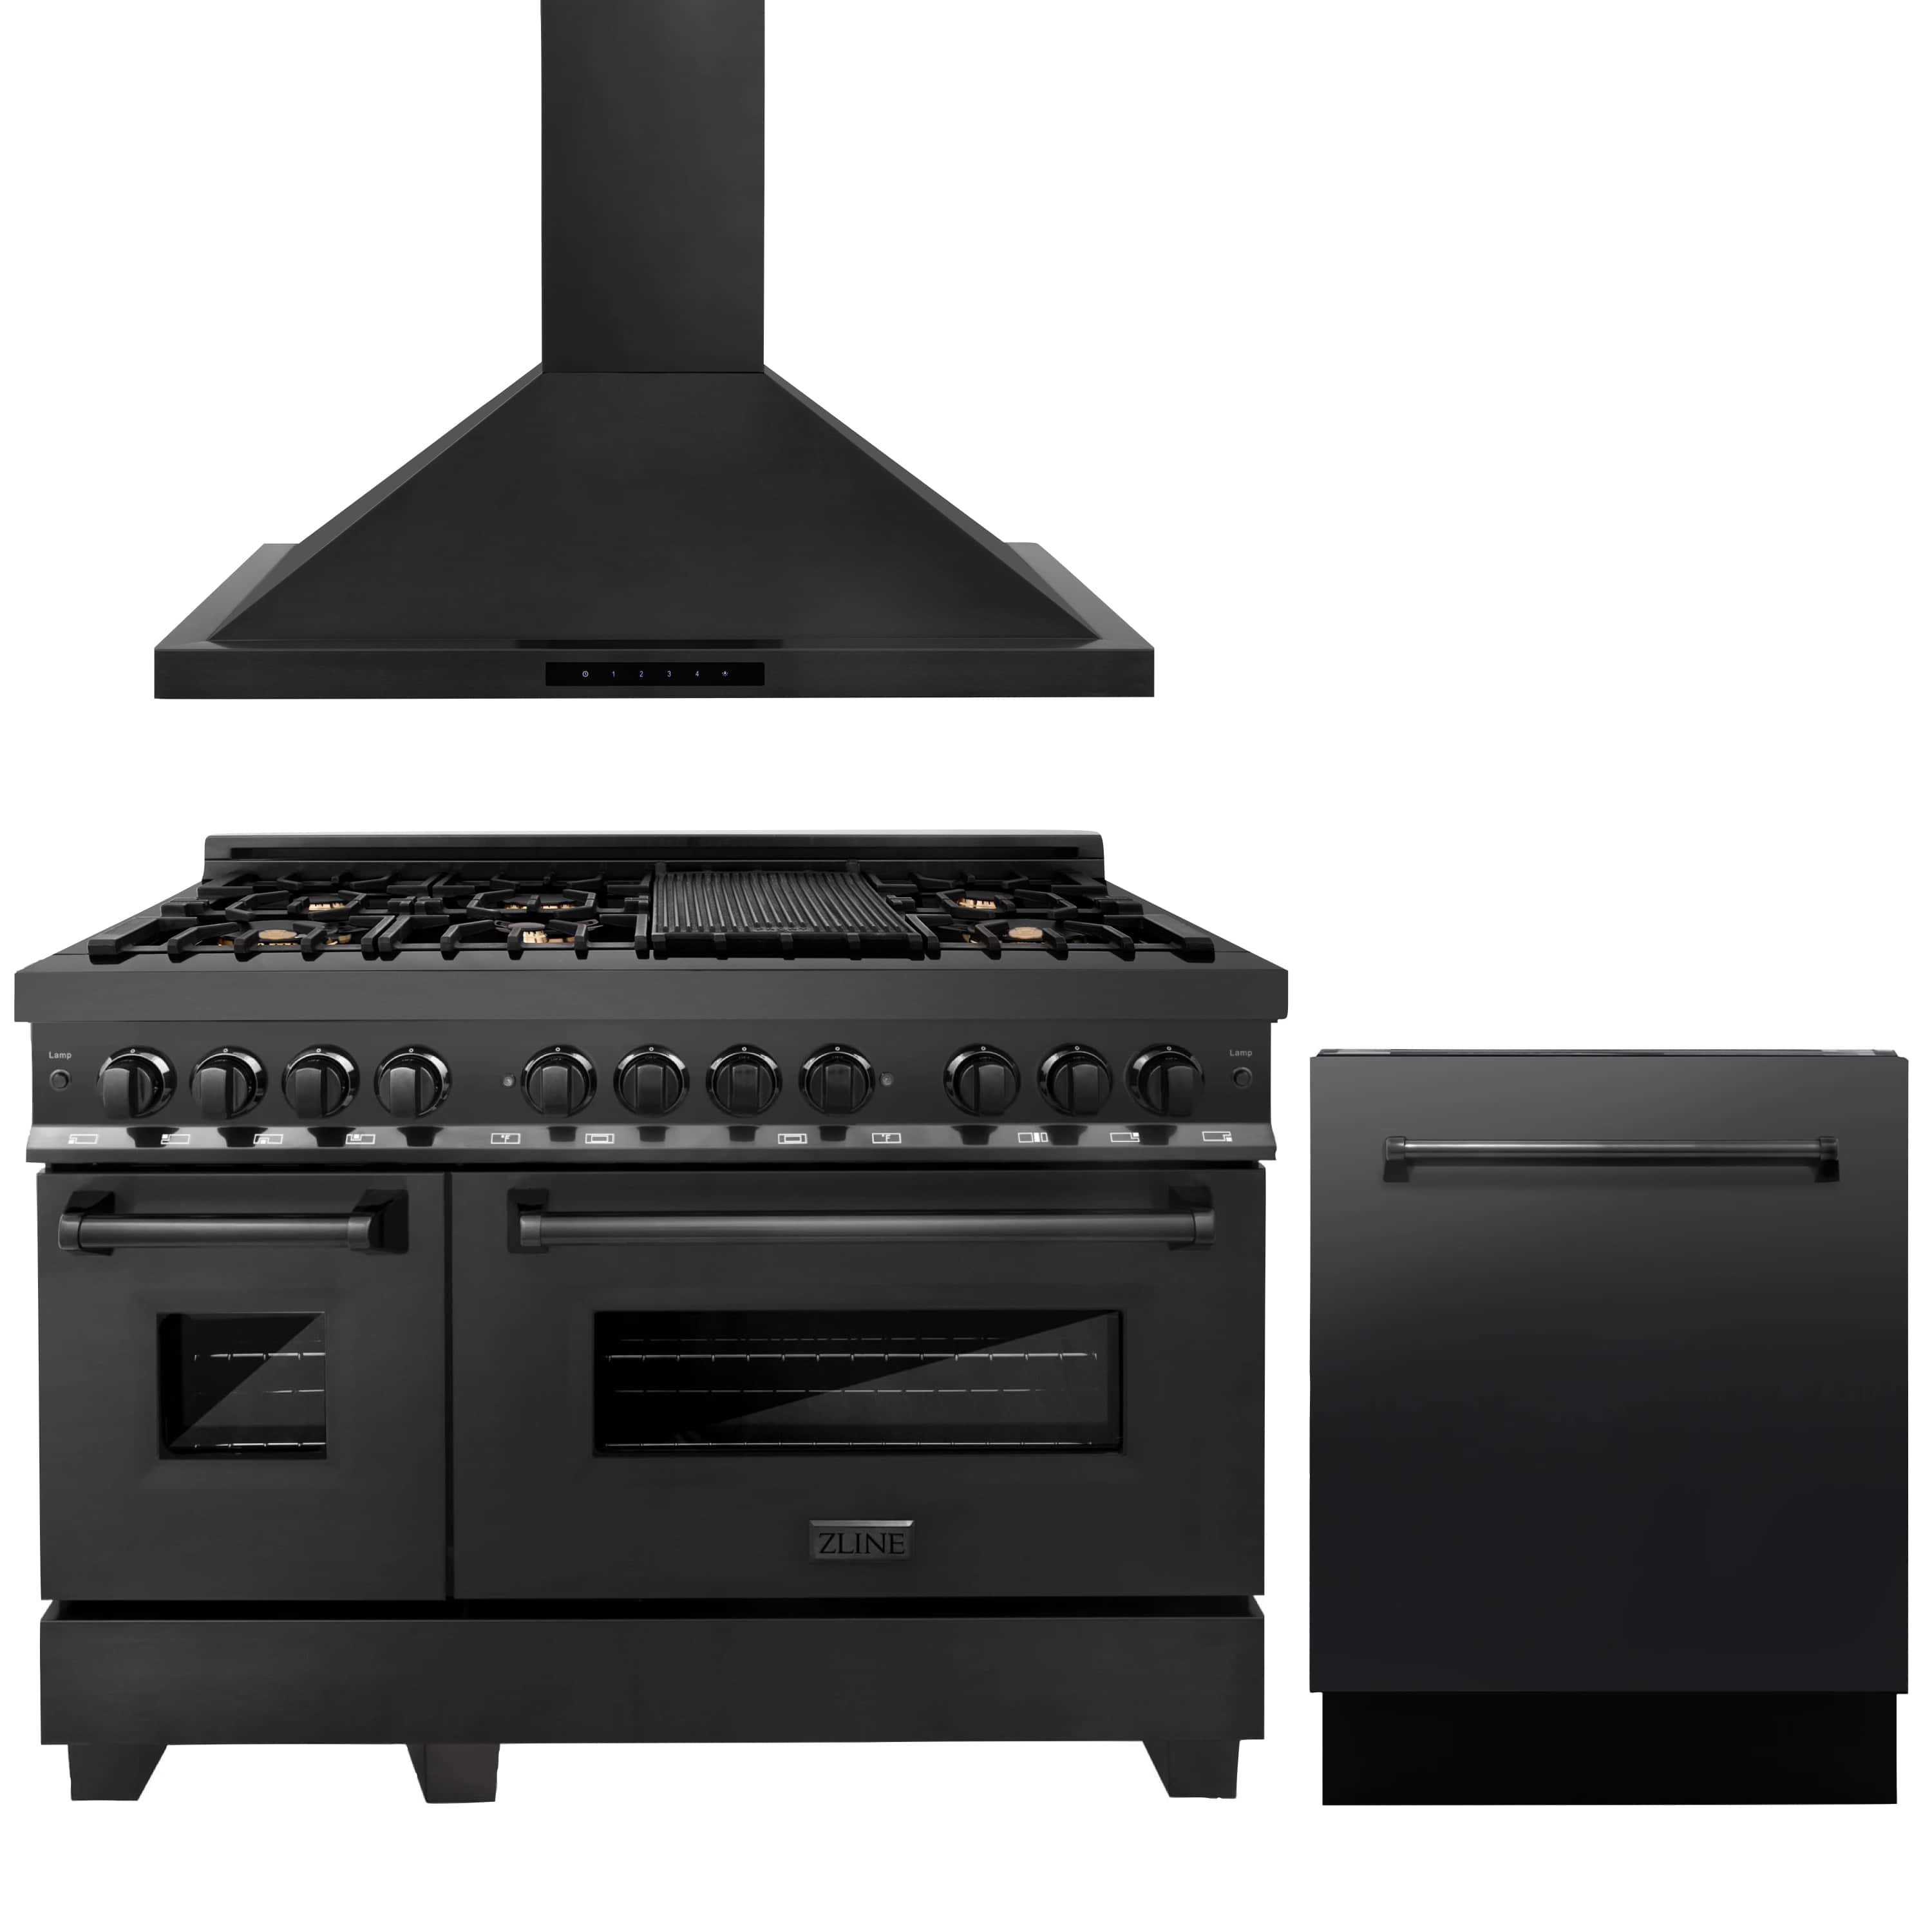 ZLINE 3-Piece Appliance Package - 48-Inch Dual Fuel Range with Brass Burners, Convertible Wall Mount Hood, and 3-Rack Dishwasher in Black Stainless Steel (3KP-RABRH48-DWV)